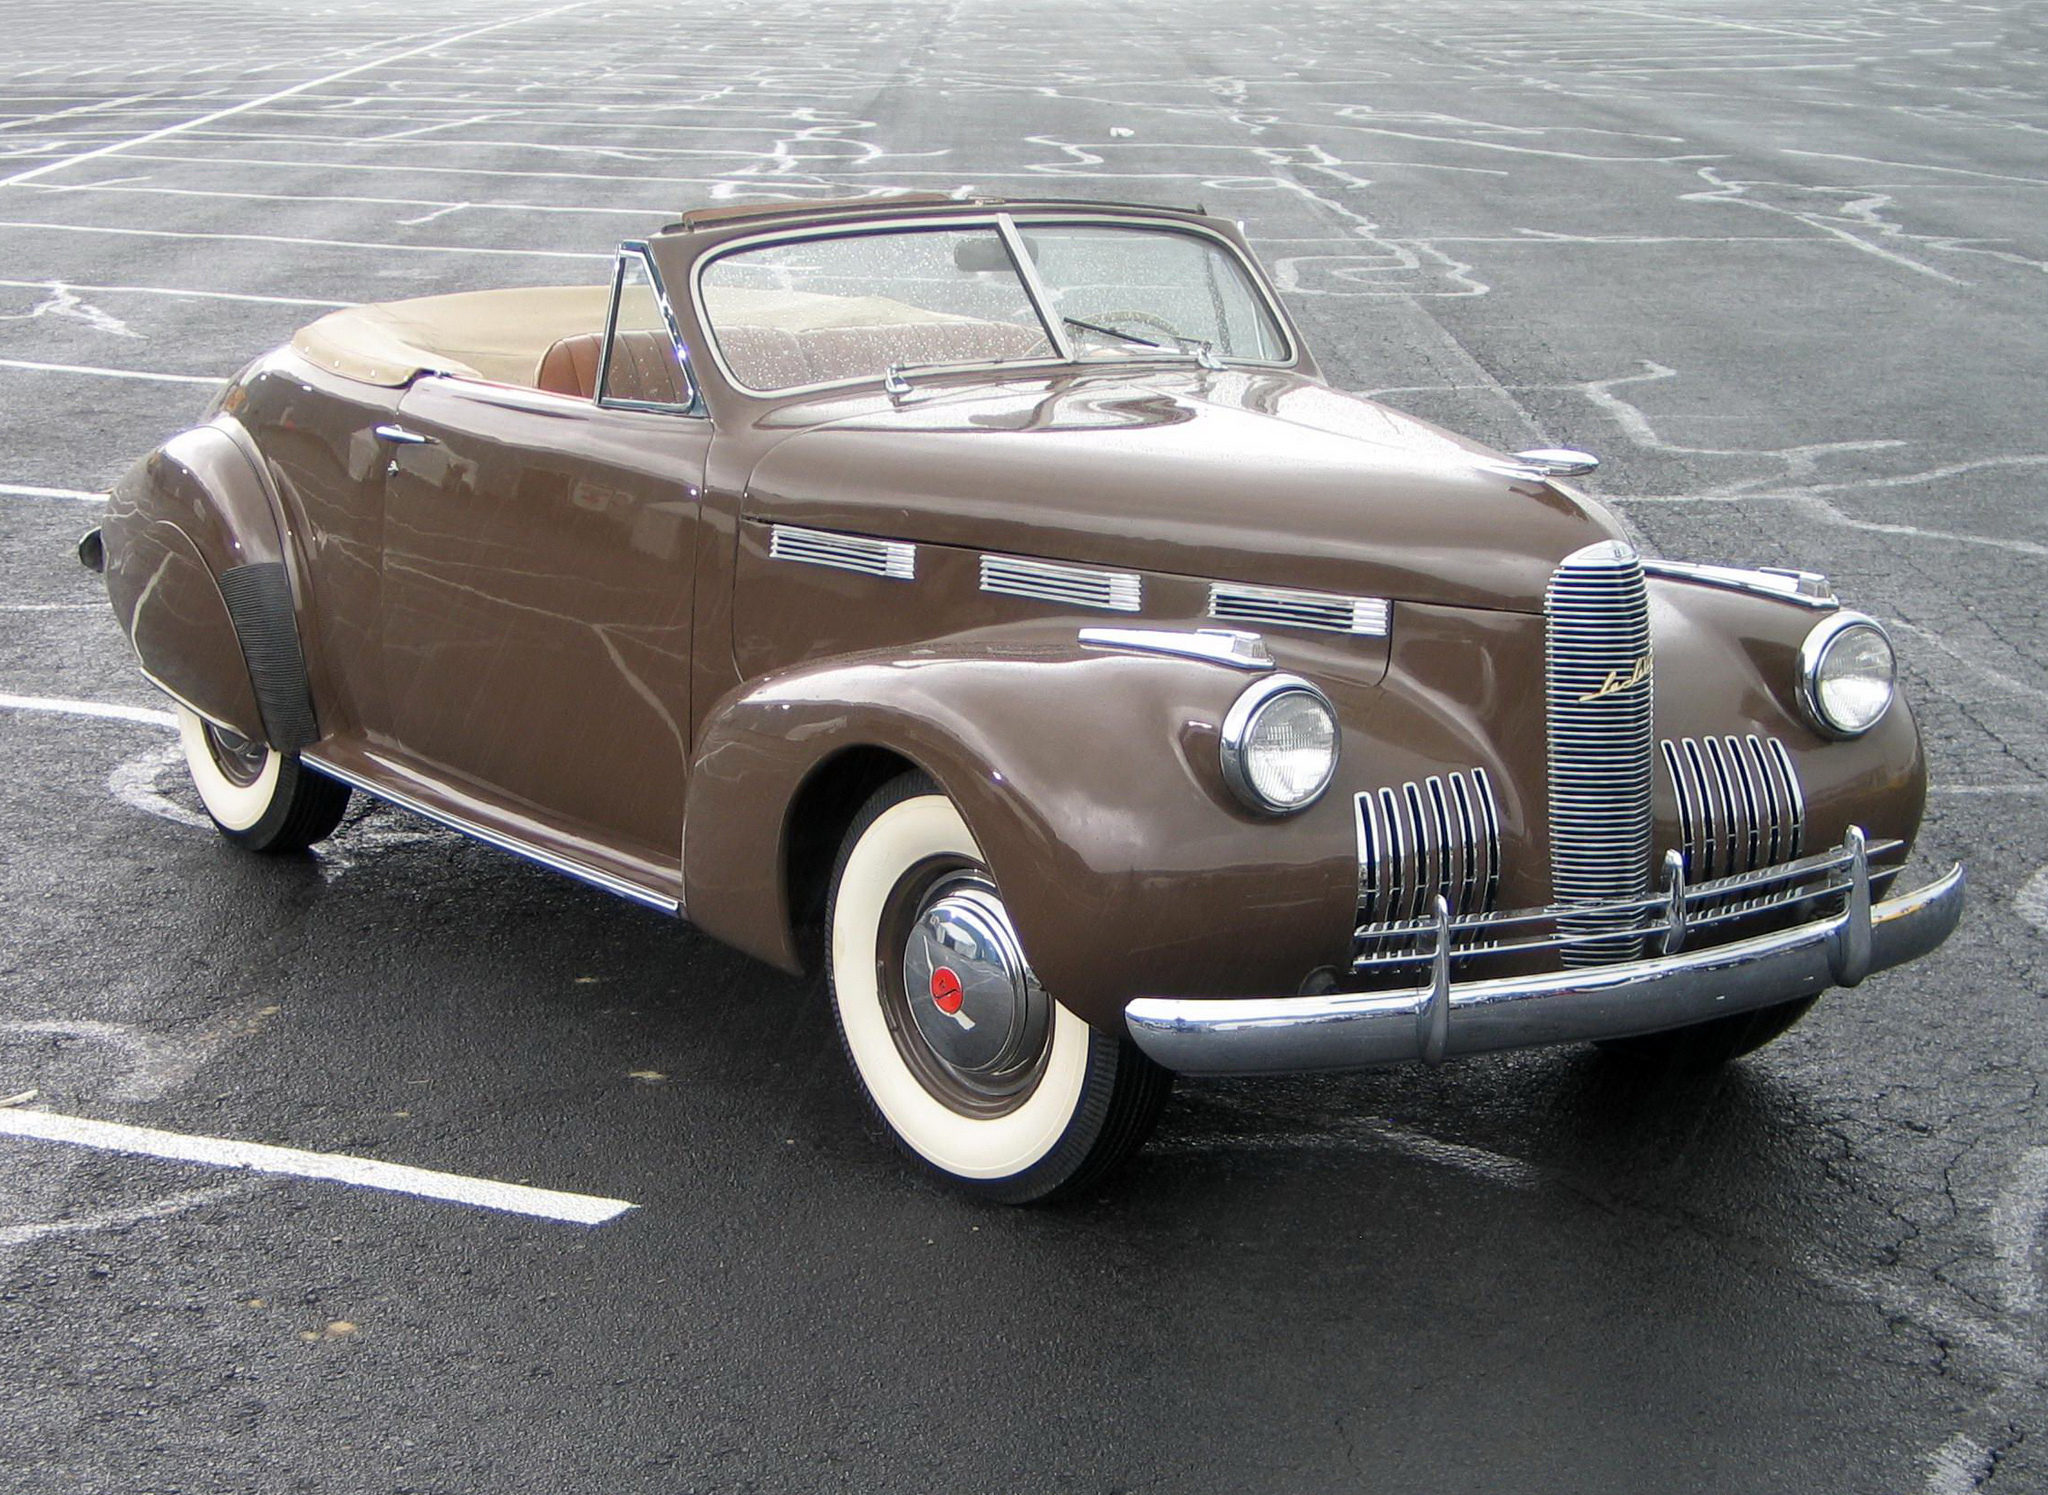 1940 LaSalle Convertible Coupe